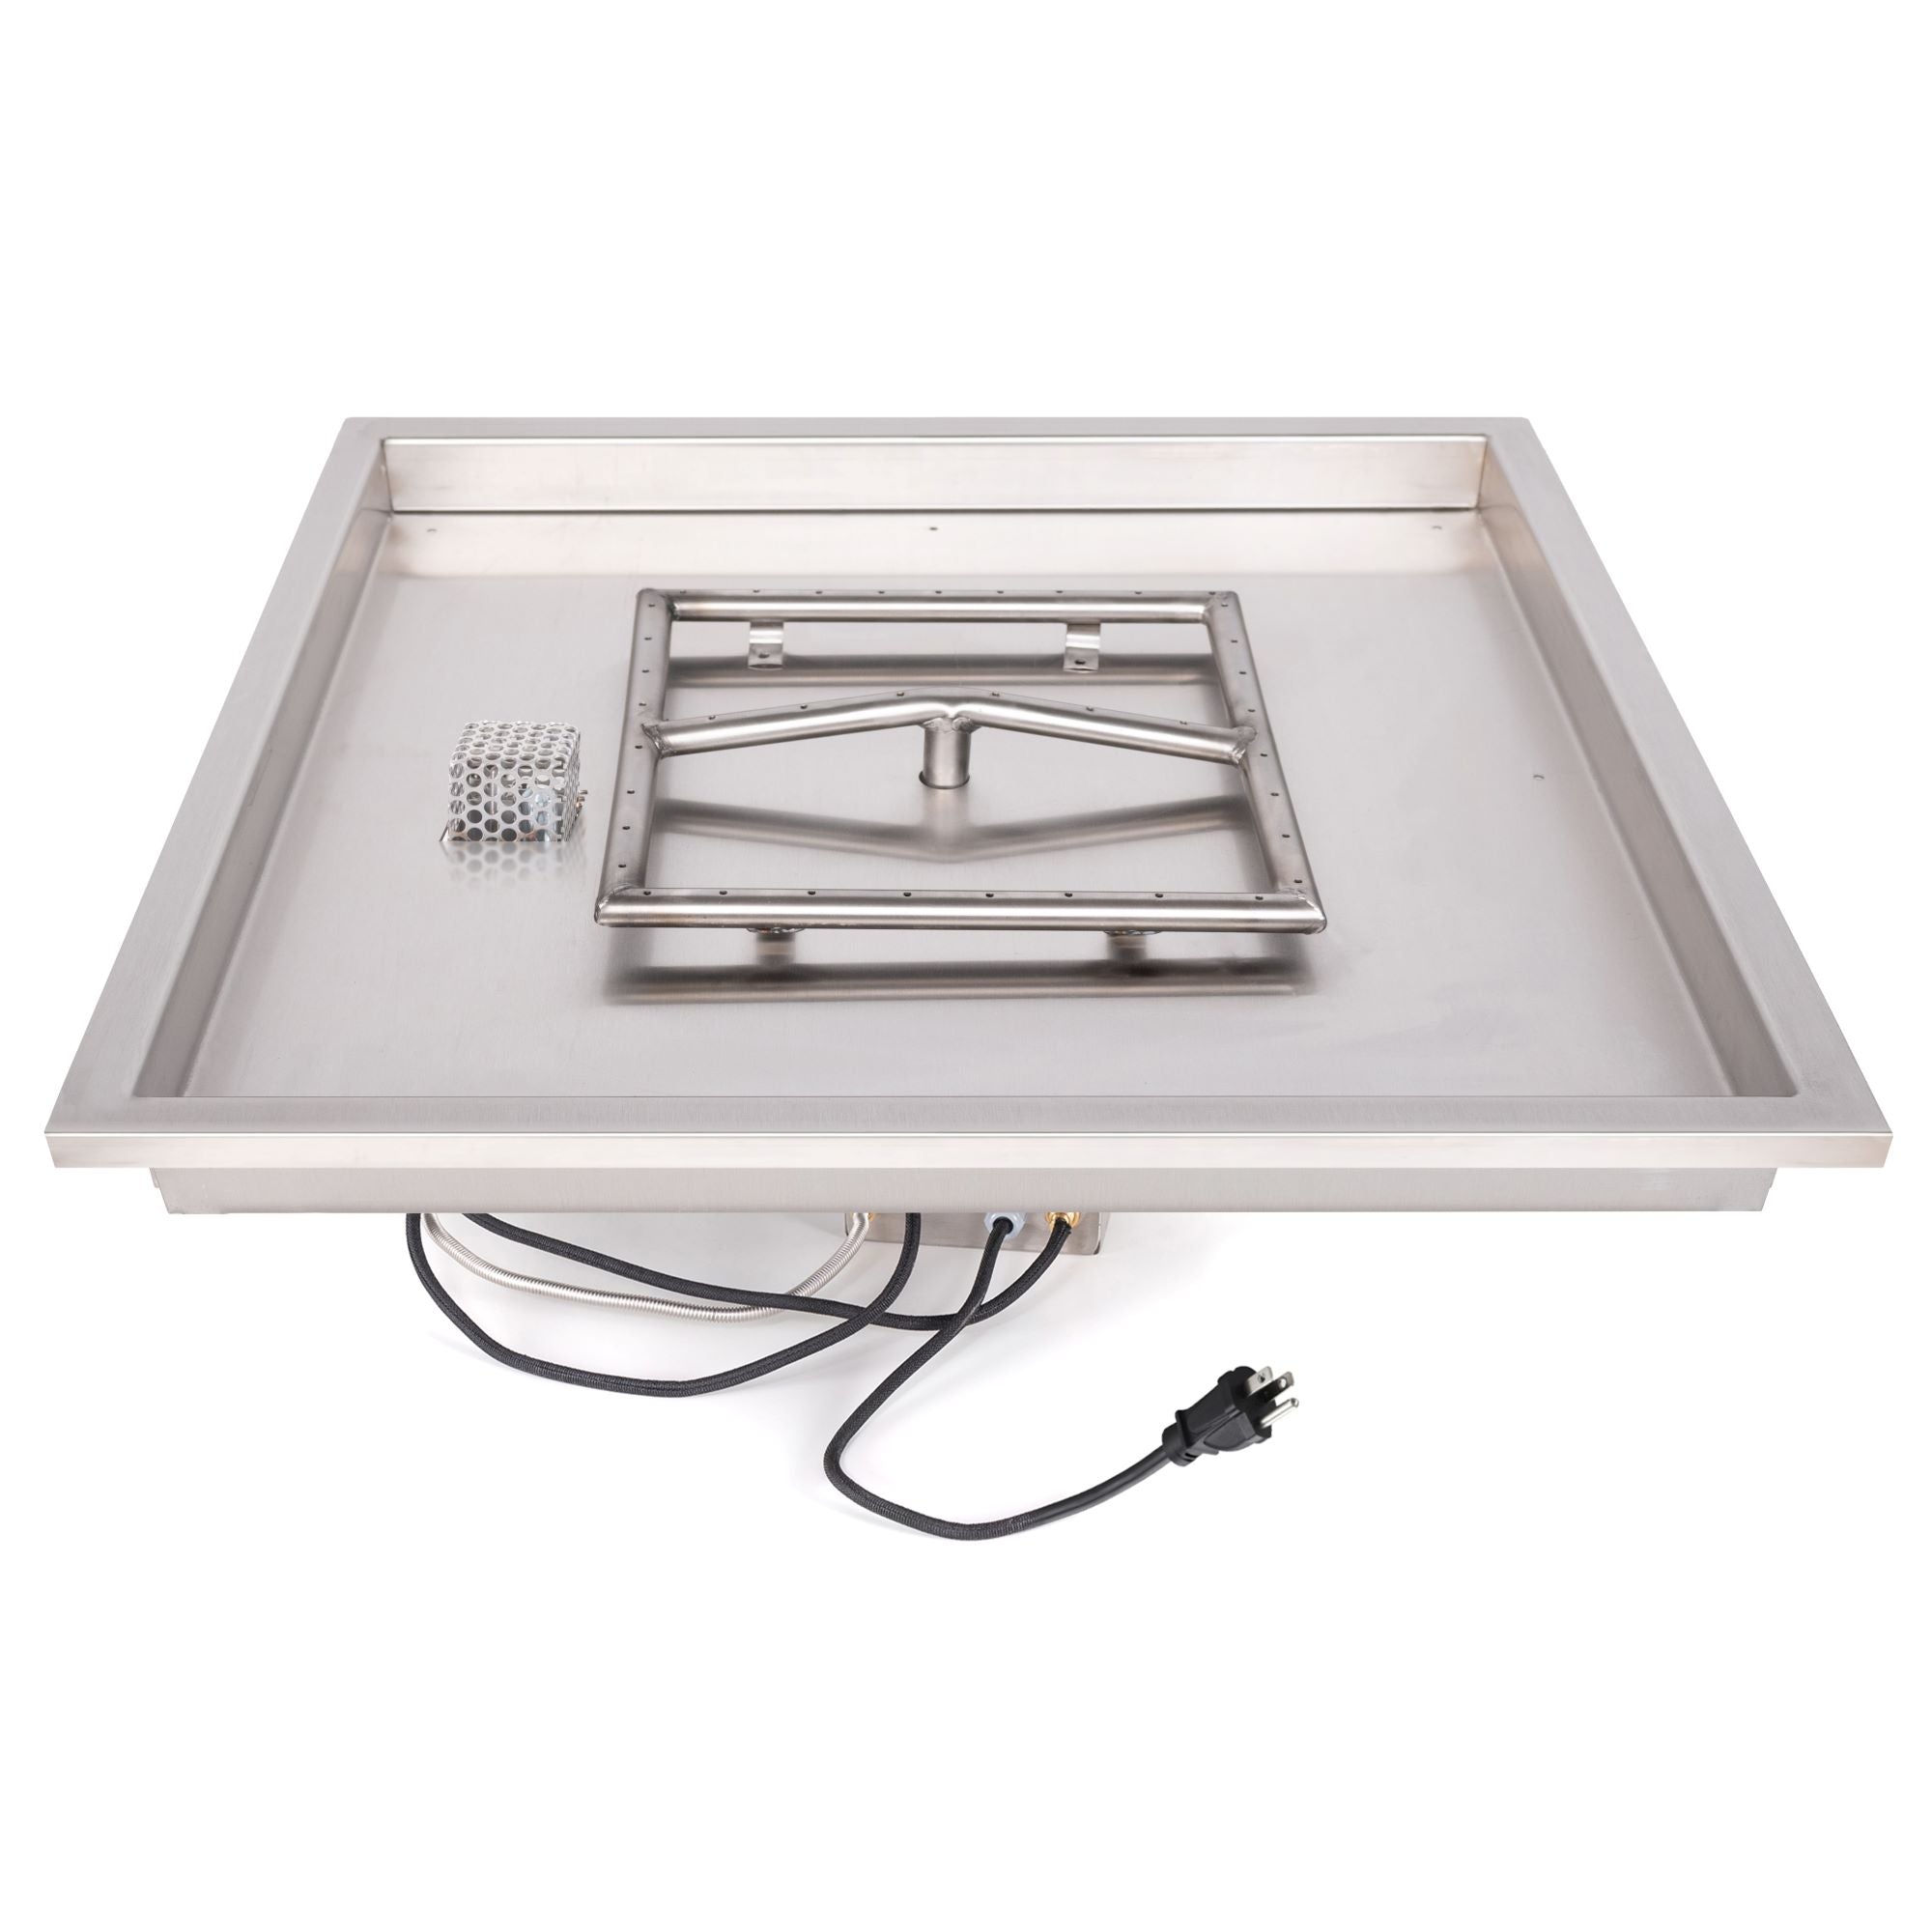 The Outdoor Plus Squared Raised Lip Drop-in Pan with Stainless Steel Square Burner